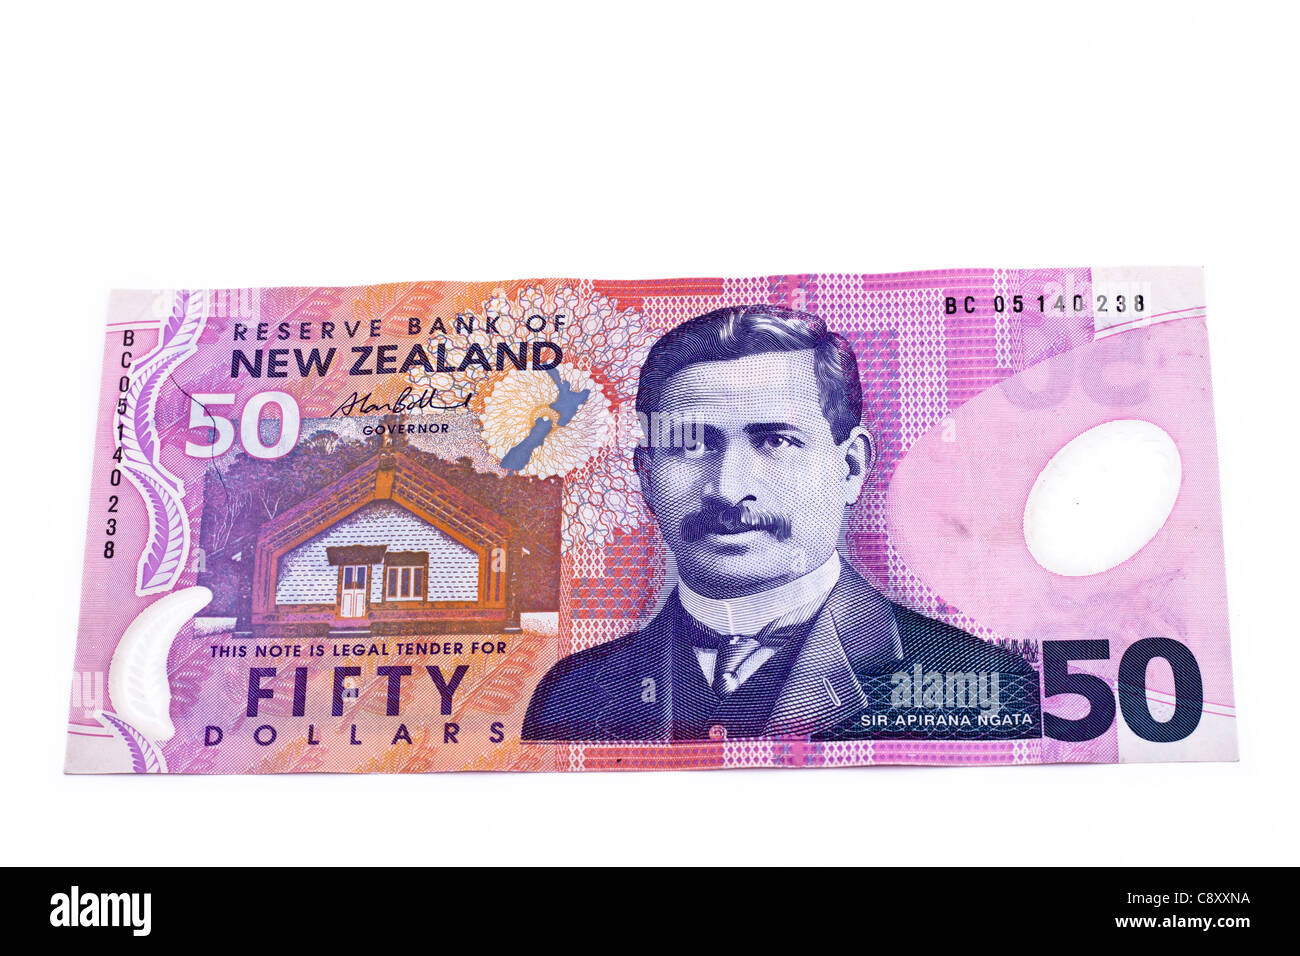 Dollar note in New Zealand currency, isolated over white background. Stock Photo